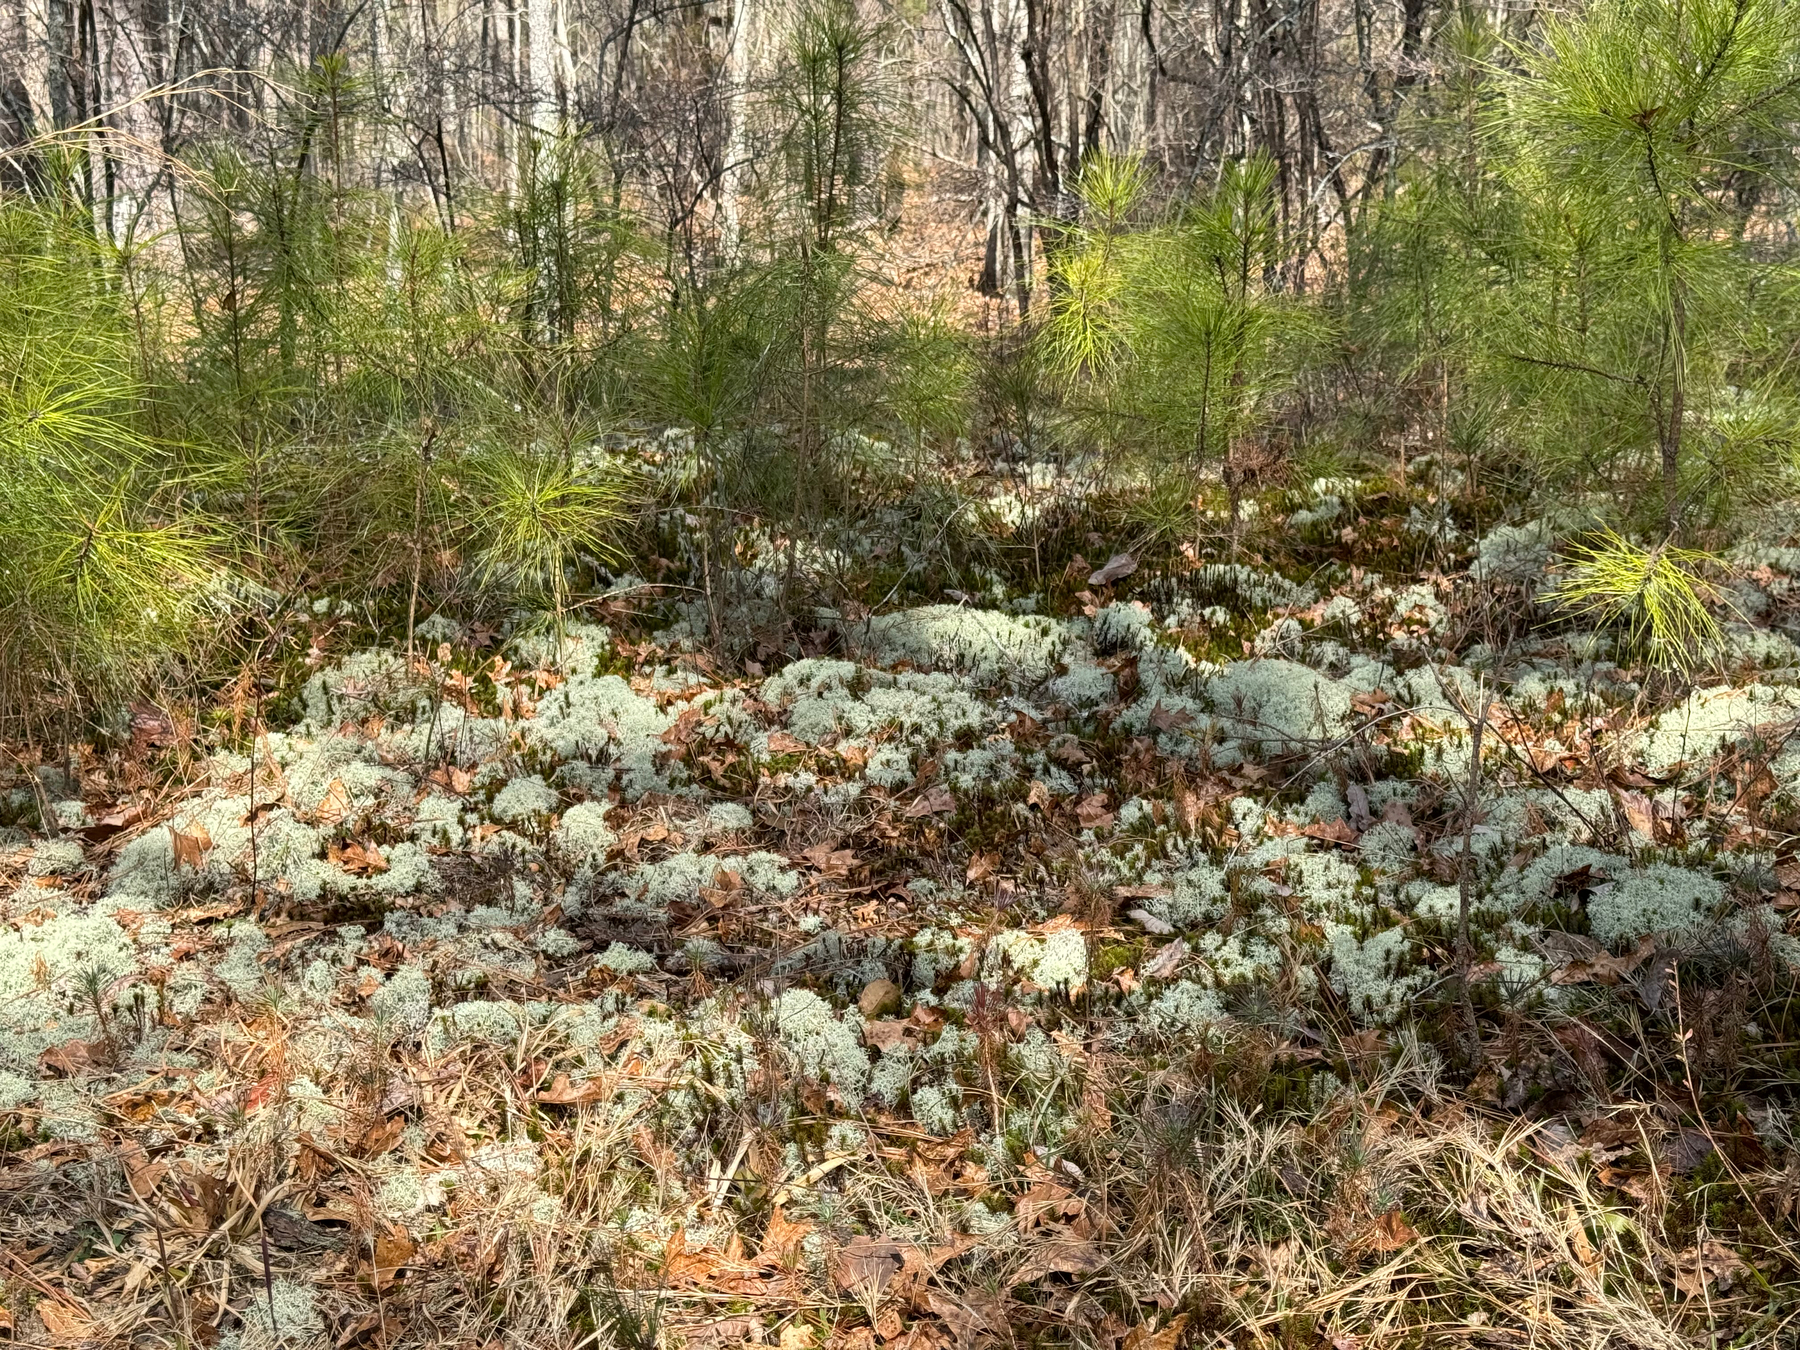 A forest floor covered with patches of light-colored lichen and scattered young pine saplings, with a backdrop of leafless trees.